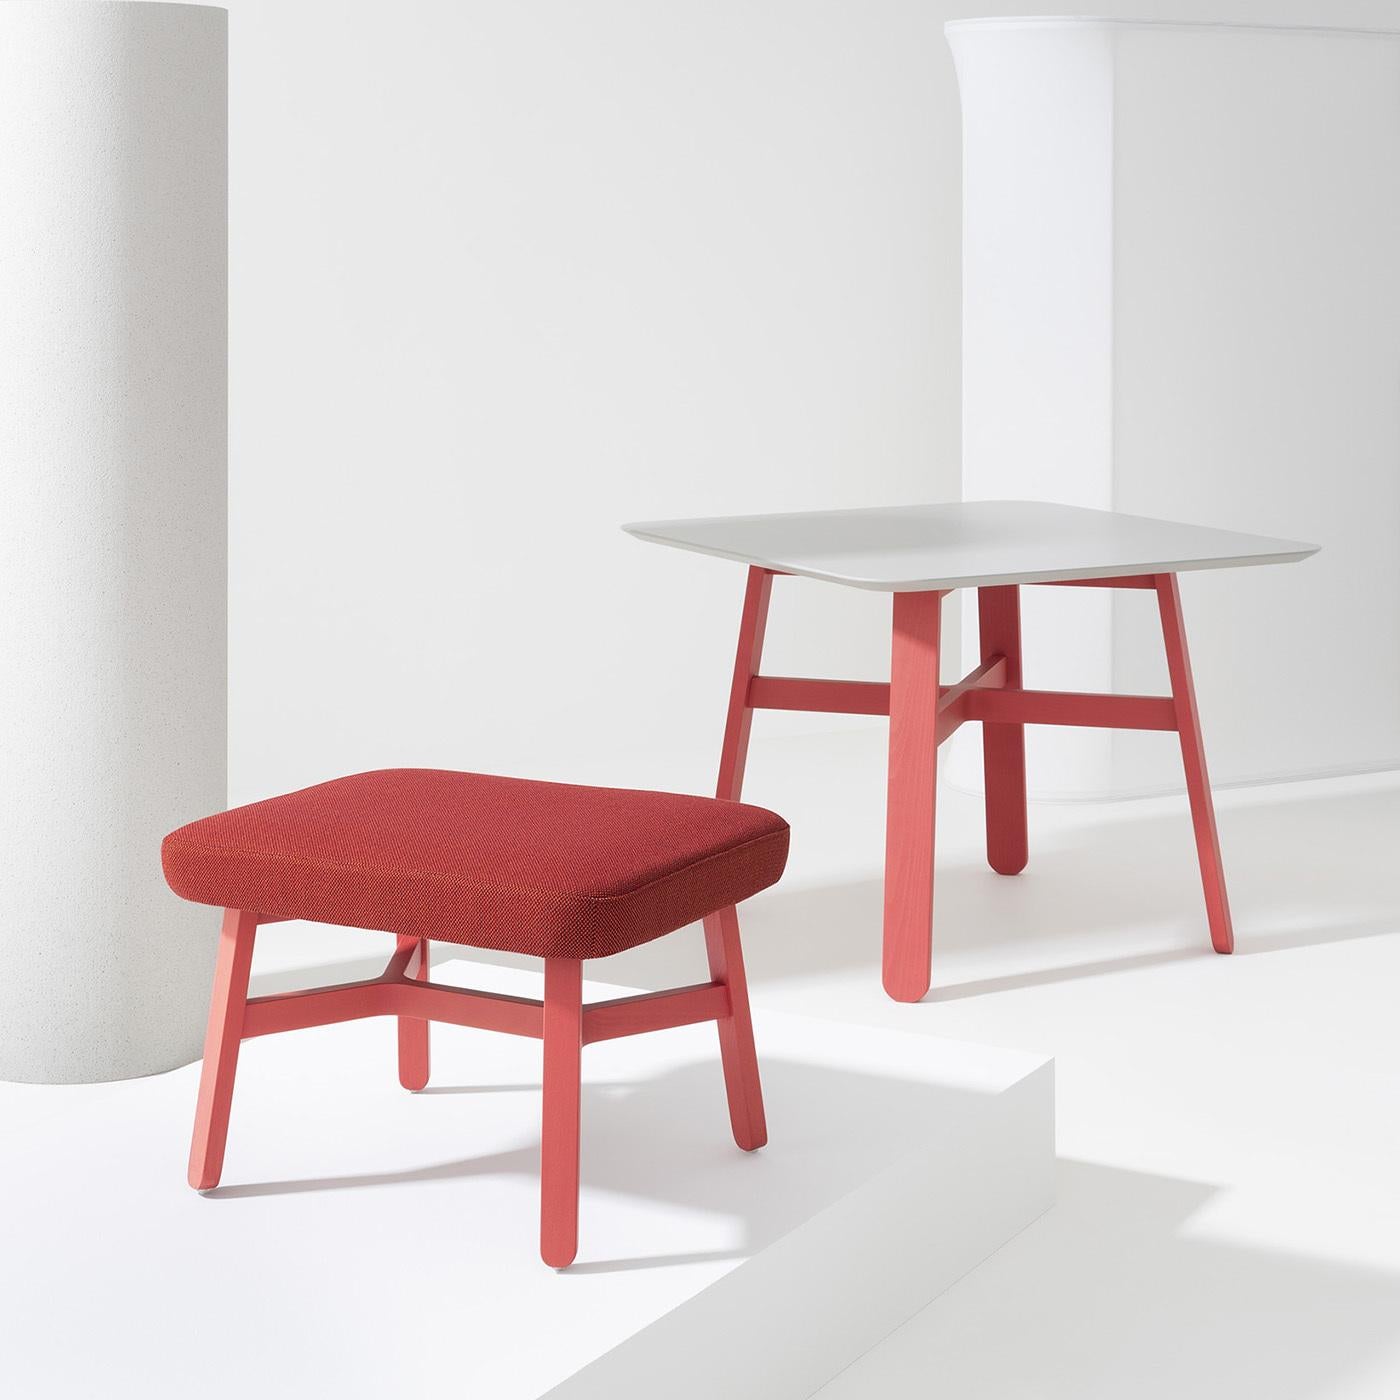 Brimming with stylish flair, this ottoman designed by Emilio Nanni will bring a lively pop of color to any interior. Its sleek silhouette is fashioned of beech tinted in a bright shade of red, with flattened, slightly slanted legs supporting the